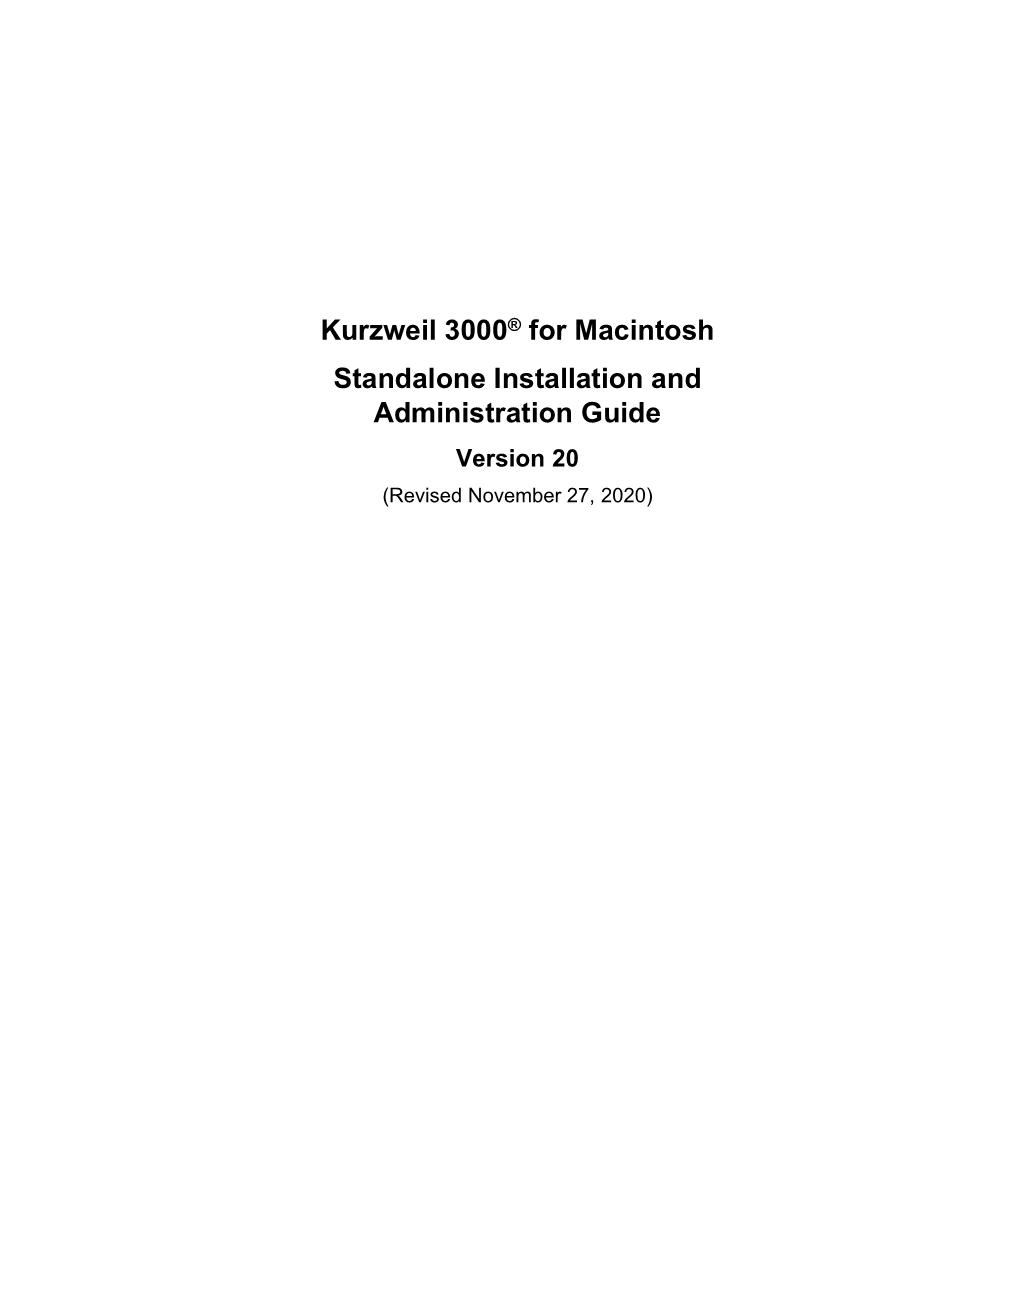 Kurzweil 3000 ® for Macintosh Standalone Installation and Administration Guide